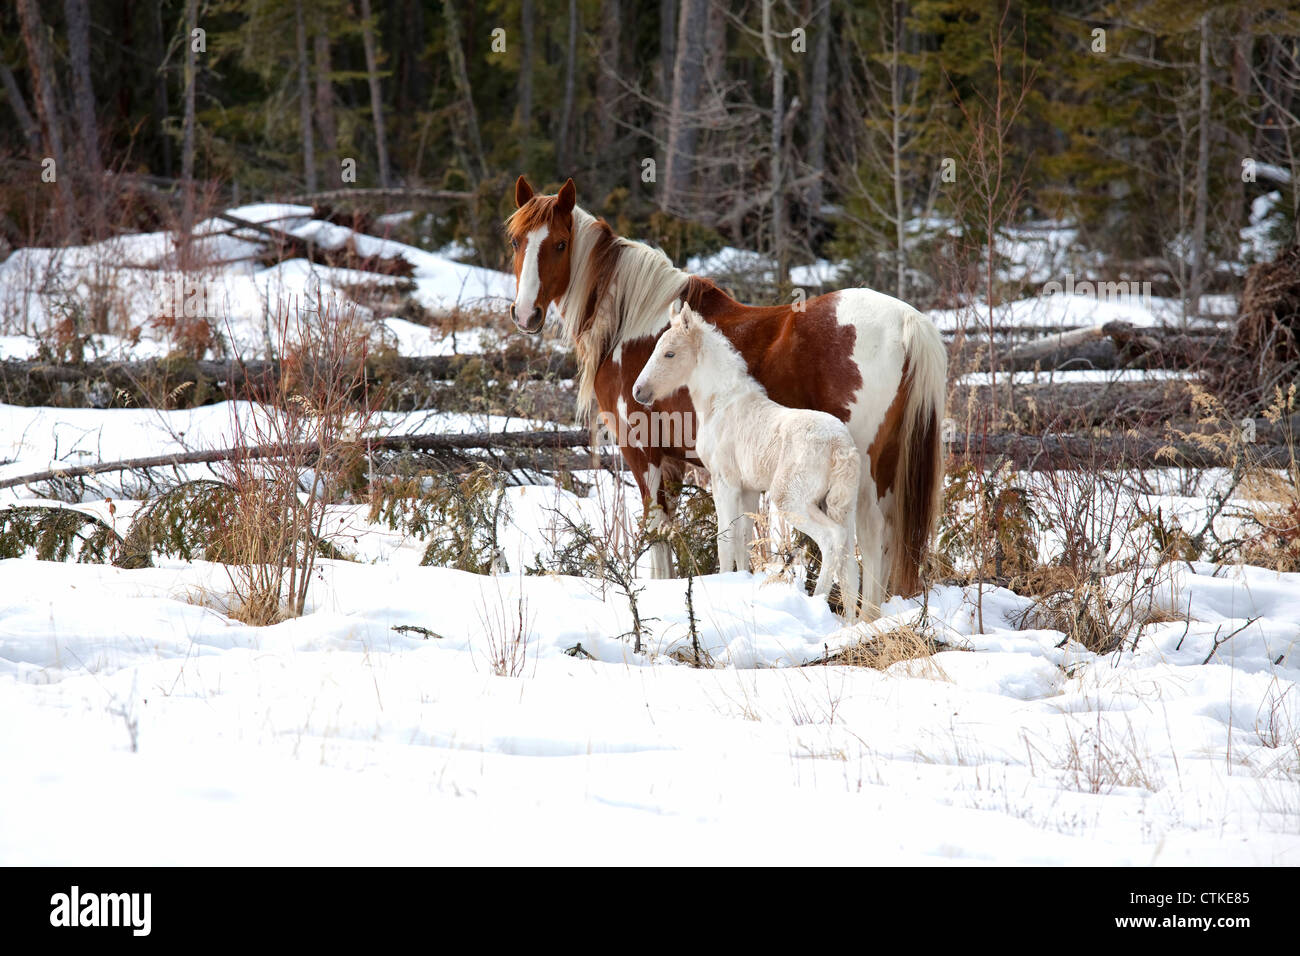 Wild horses, a pinto mare and a white foal in the wilderness of northern Alberta, Canada. Stock Photo